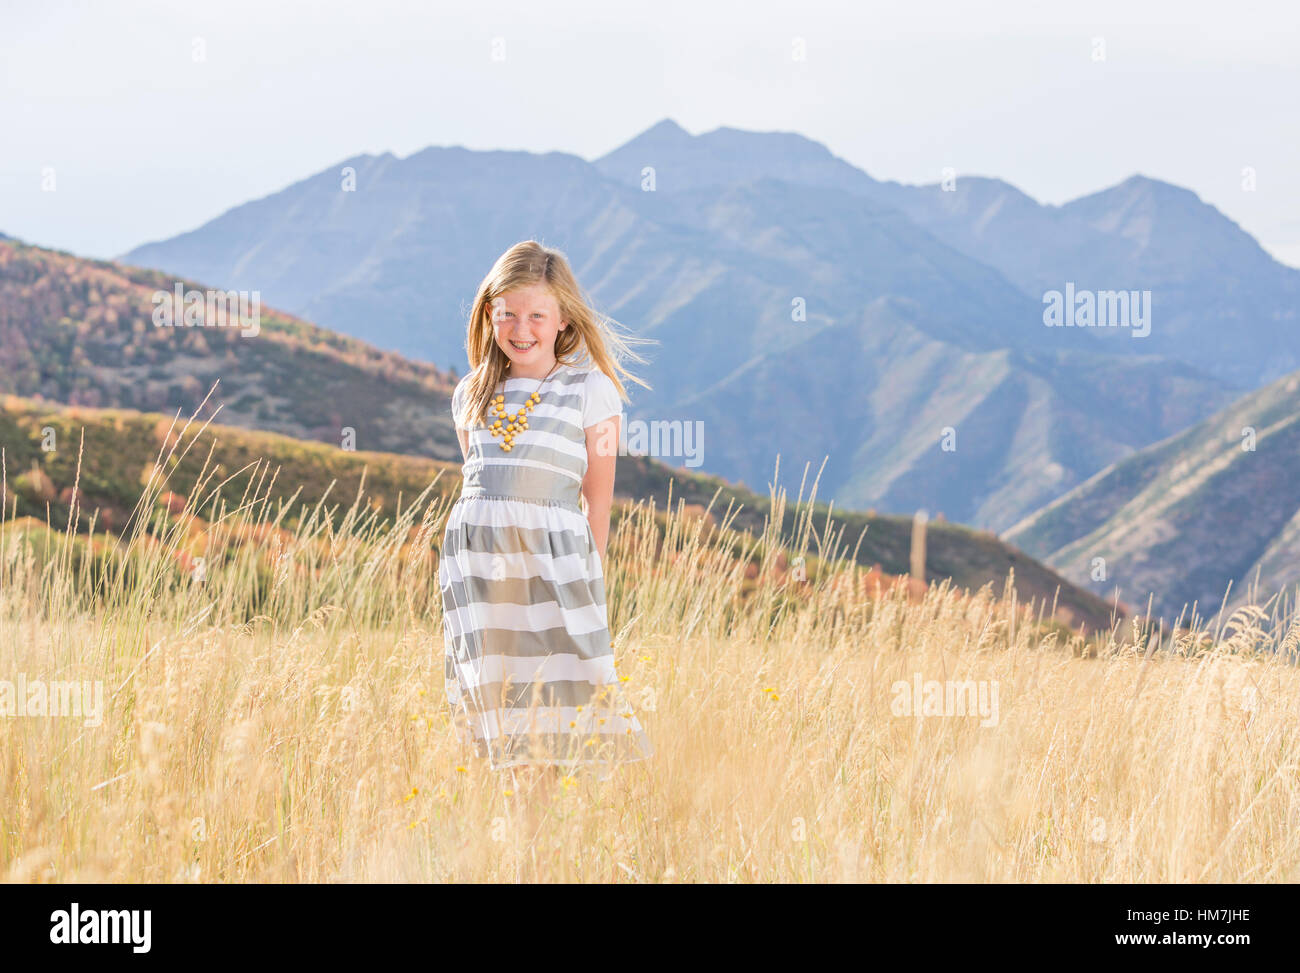 USA, Utah, Provo, Girl (8-9) standing in field Banque D'Images